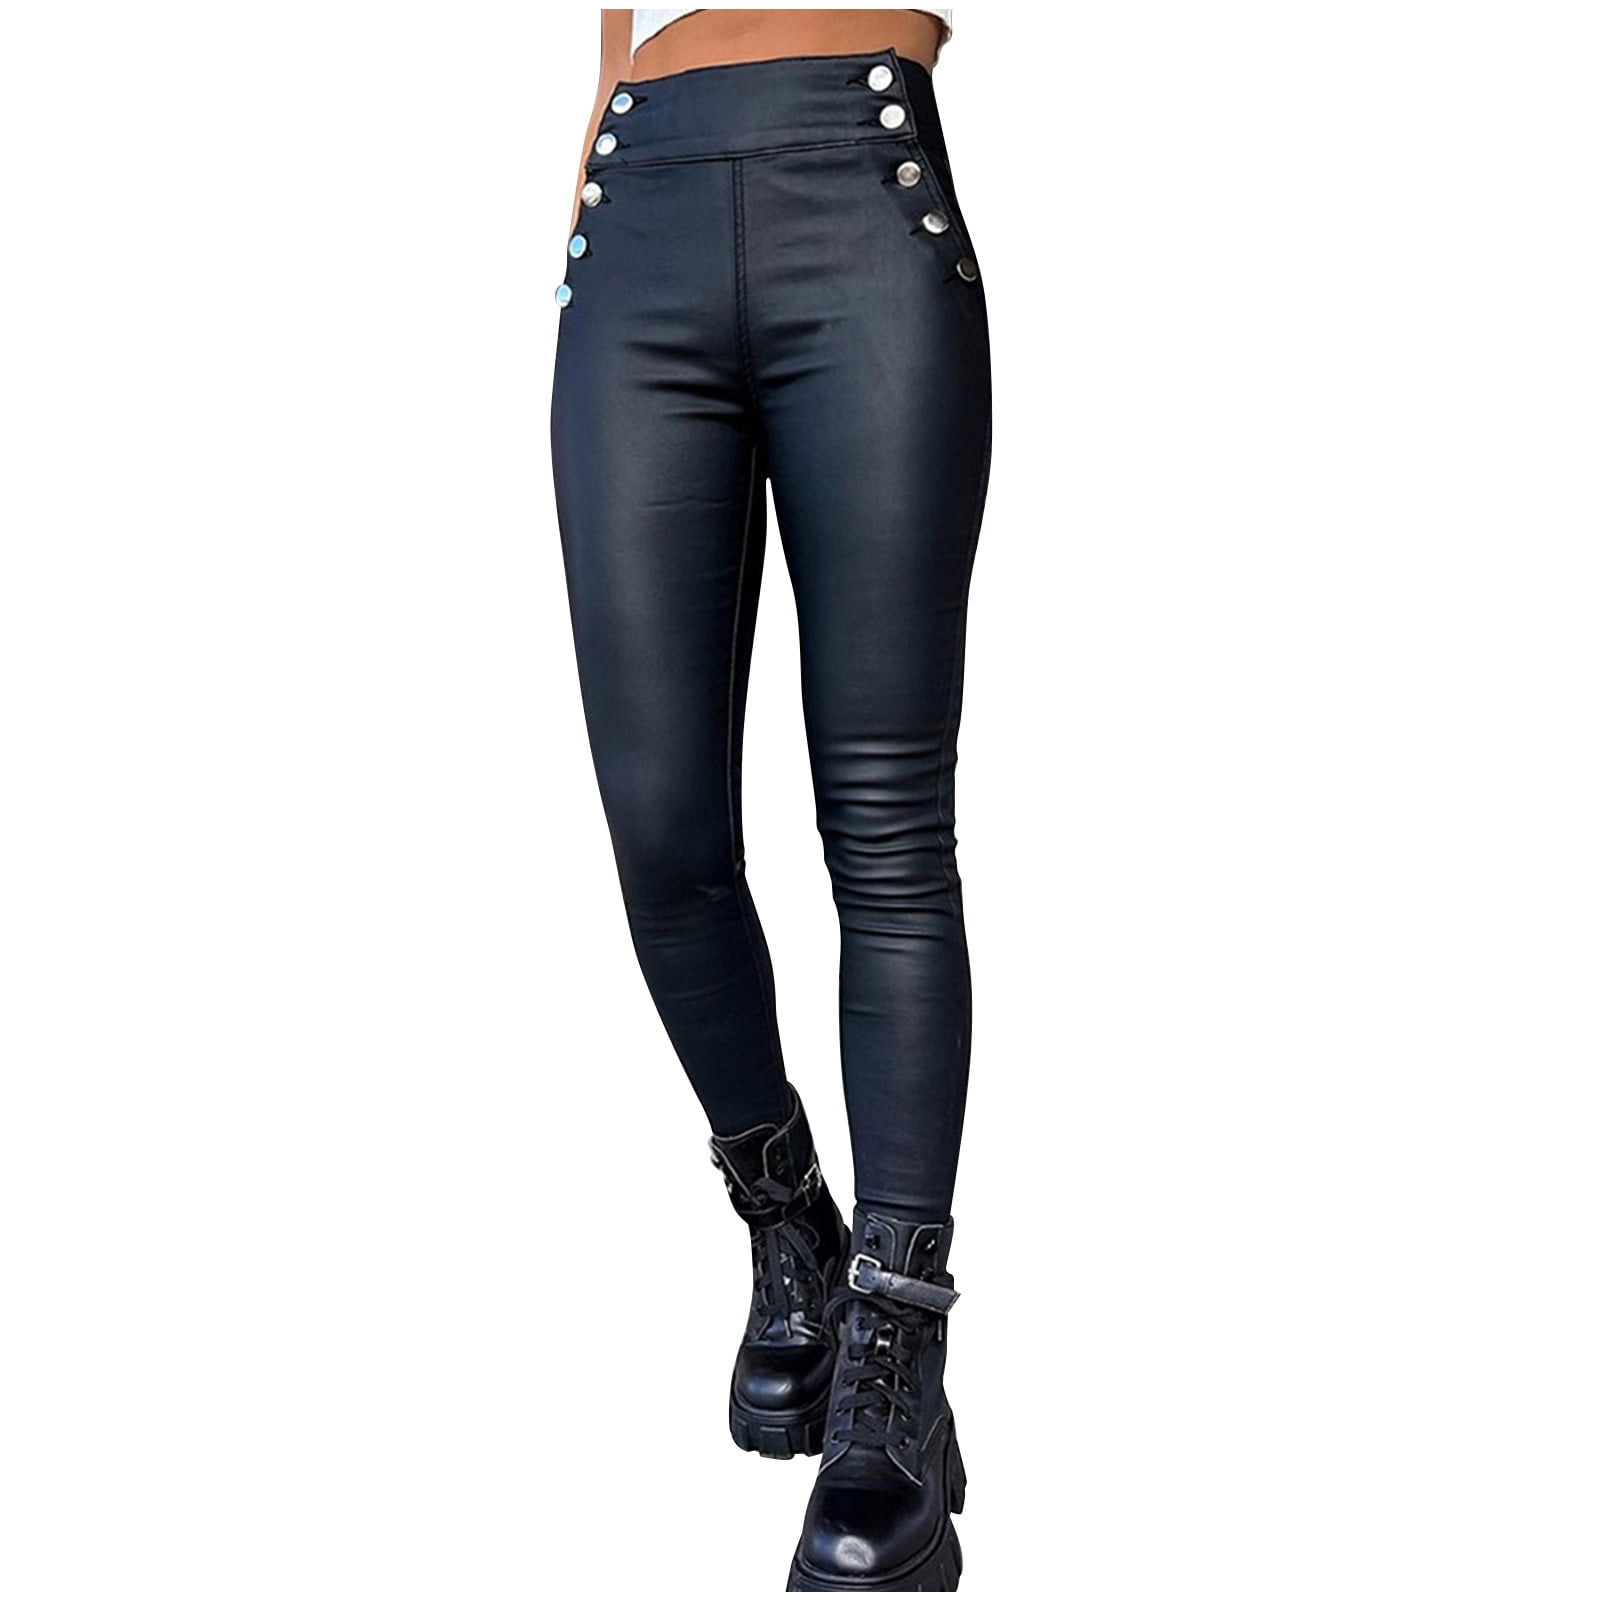 Melody Silver Leggings Fashion Womens Leather Pants Sale Casual